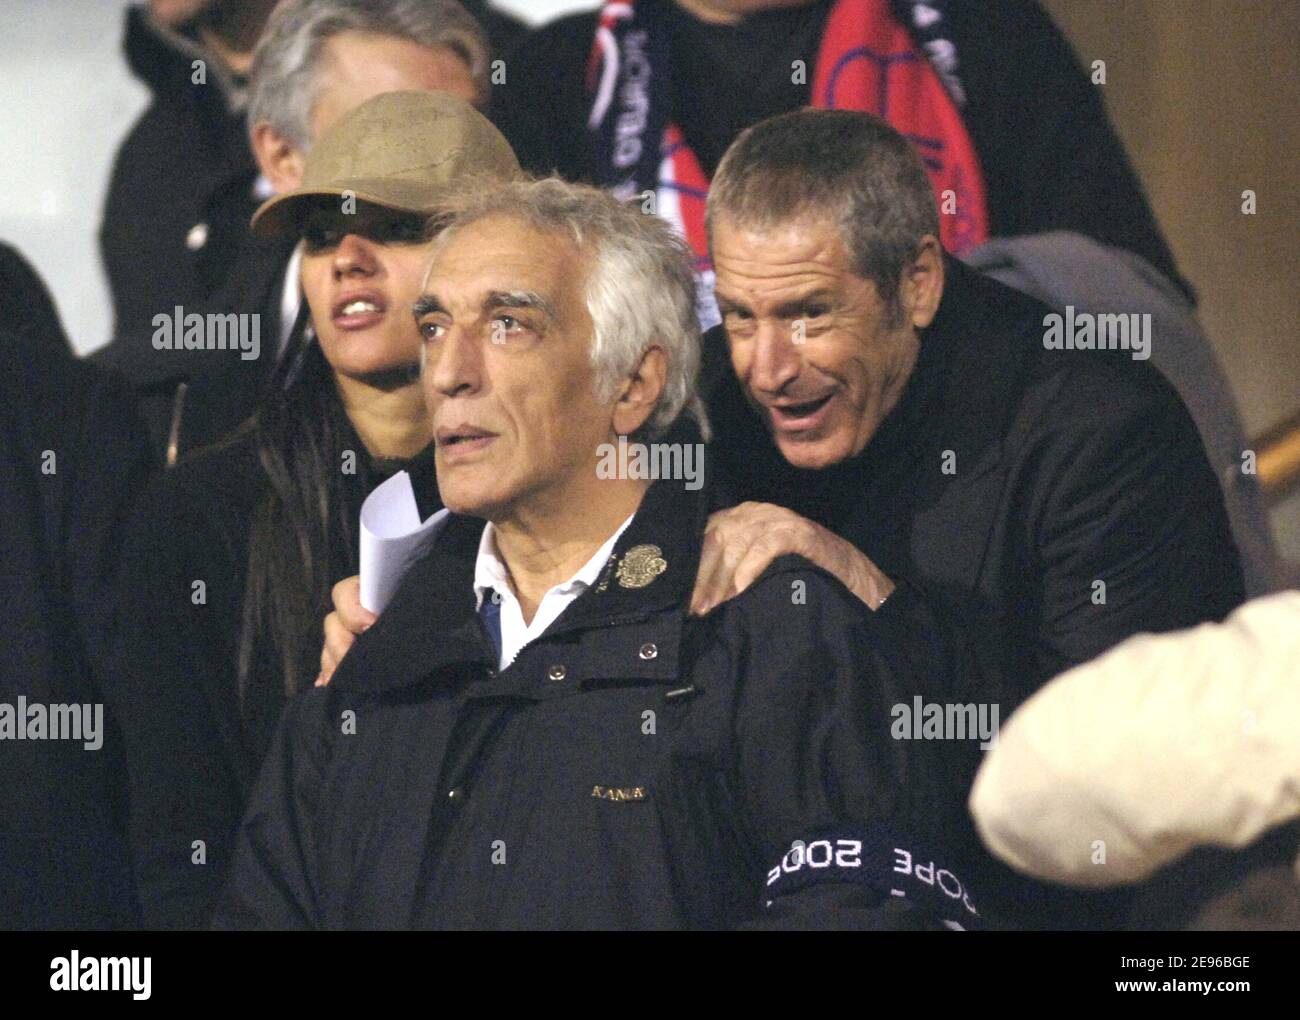 French actor Gerard Darmon and Sport's business manager Jean-Claude Darmond during the quarter finale first heat at the UEFA Champions league match, Olympic Lyonnais vs AC Milan, in Lyon, France, on March 29, 2006. The game ended in a drew 0-0. Photo by Nicolas Gouhier/Cameleon/ABACAPRESS.COM Stock Photo